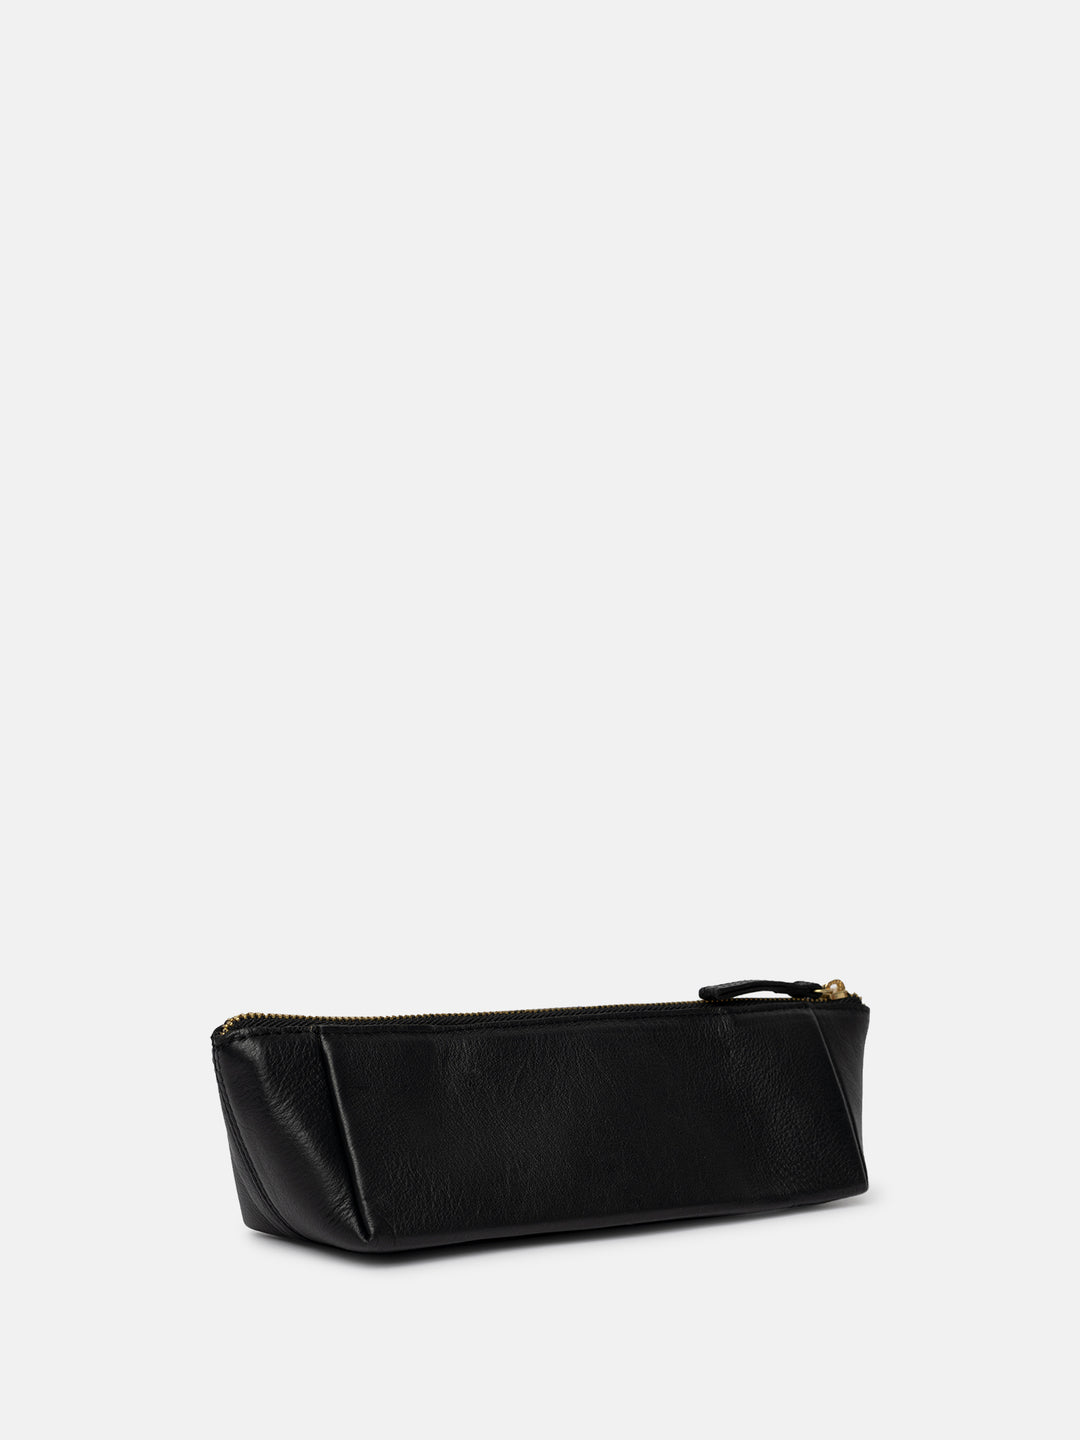 PROJECT Project 12 Organizer Black/Gold